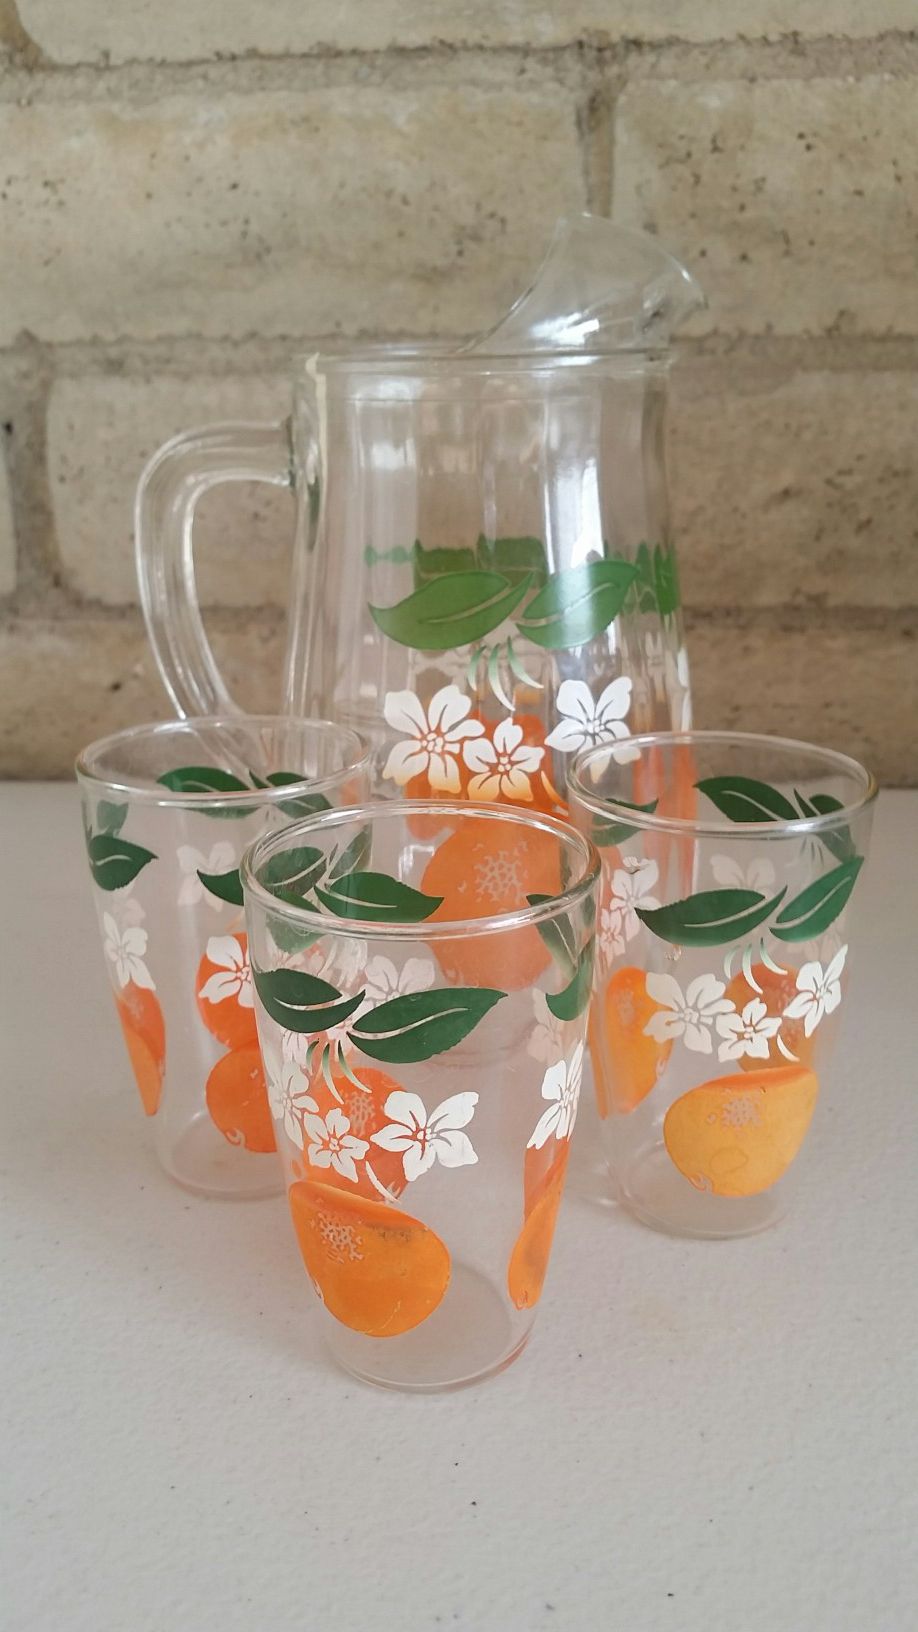 Libbey 7-Piece SANGRIA Serving Set Glasses Pitcher Recipes ~ Made in USA  for Sale in Baltimore, MD - OfferUp